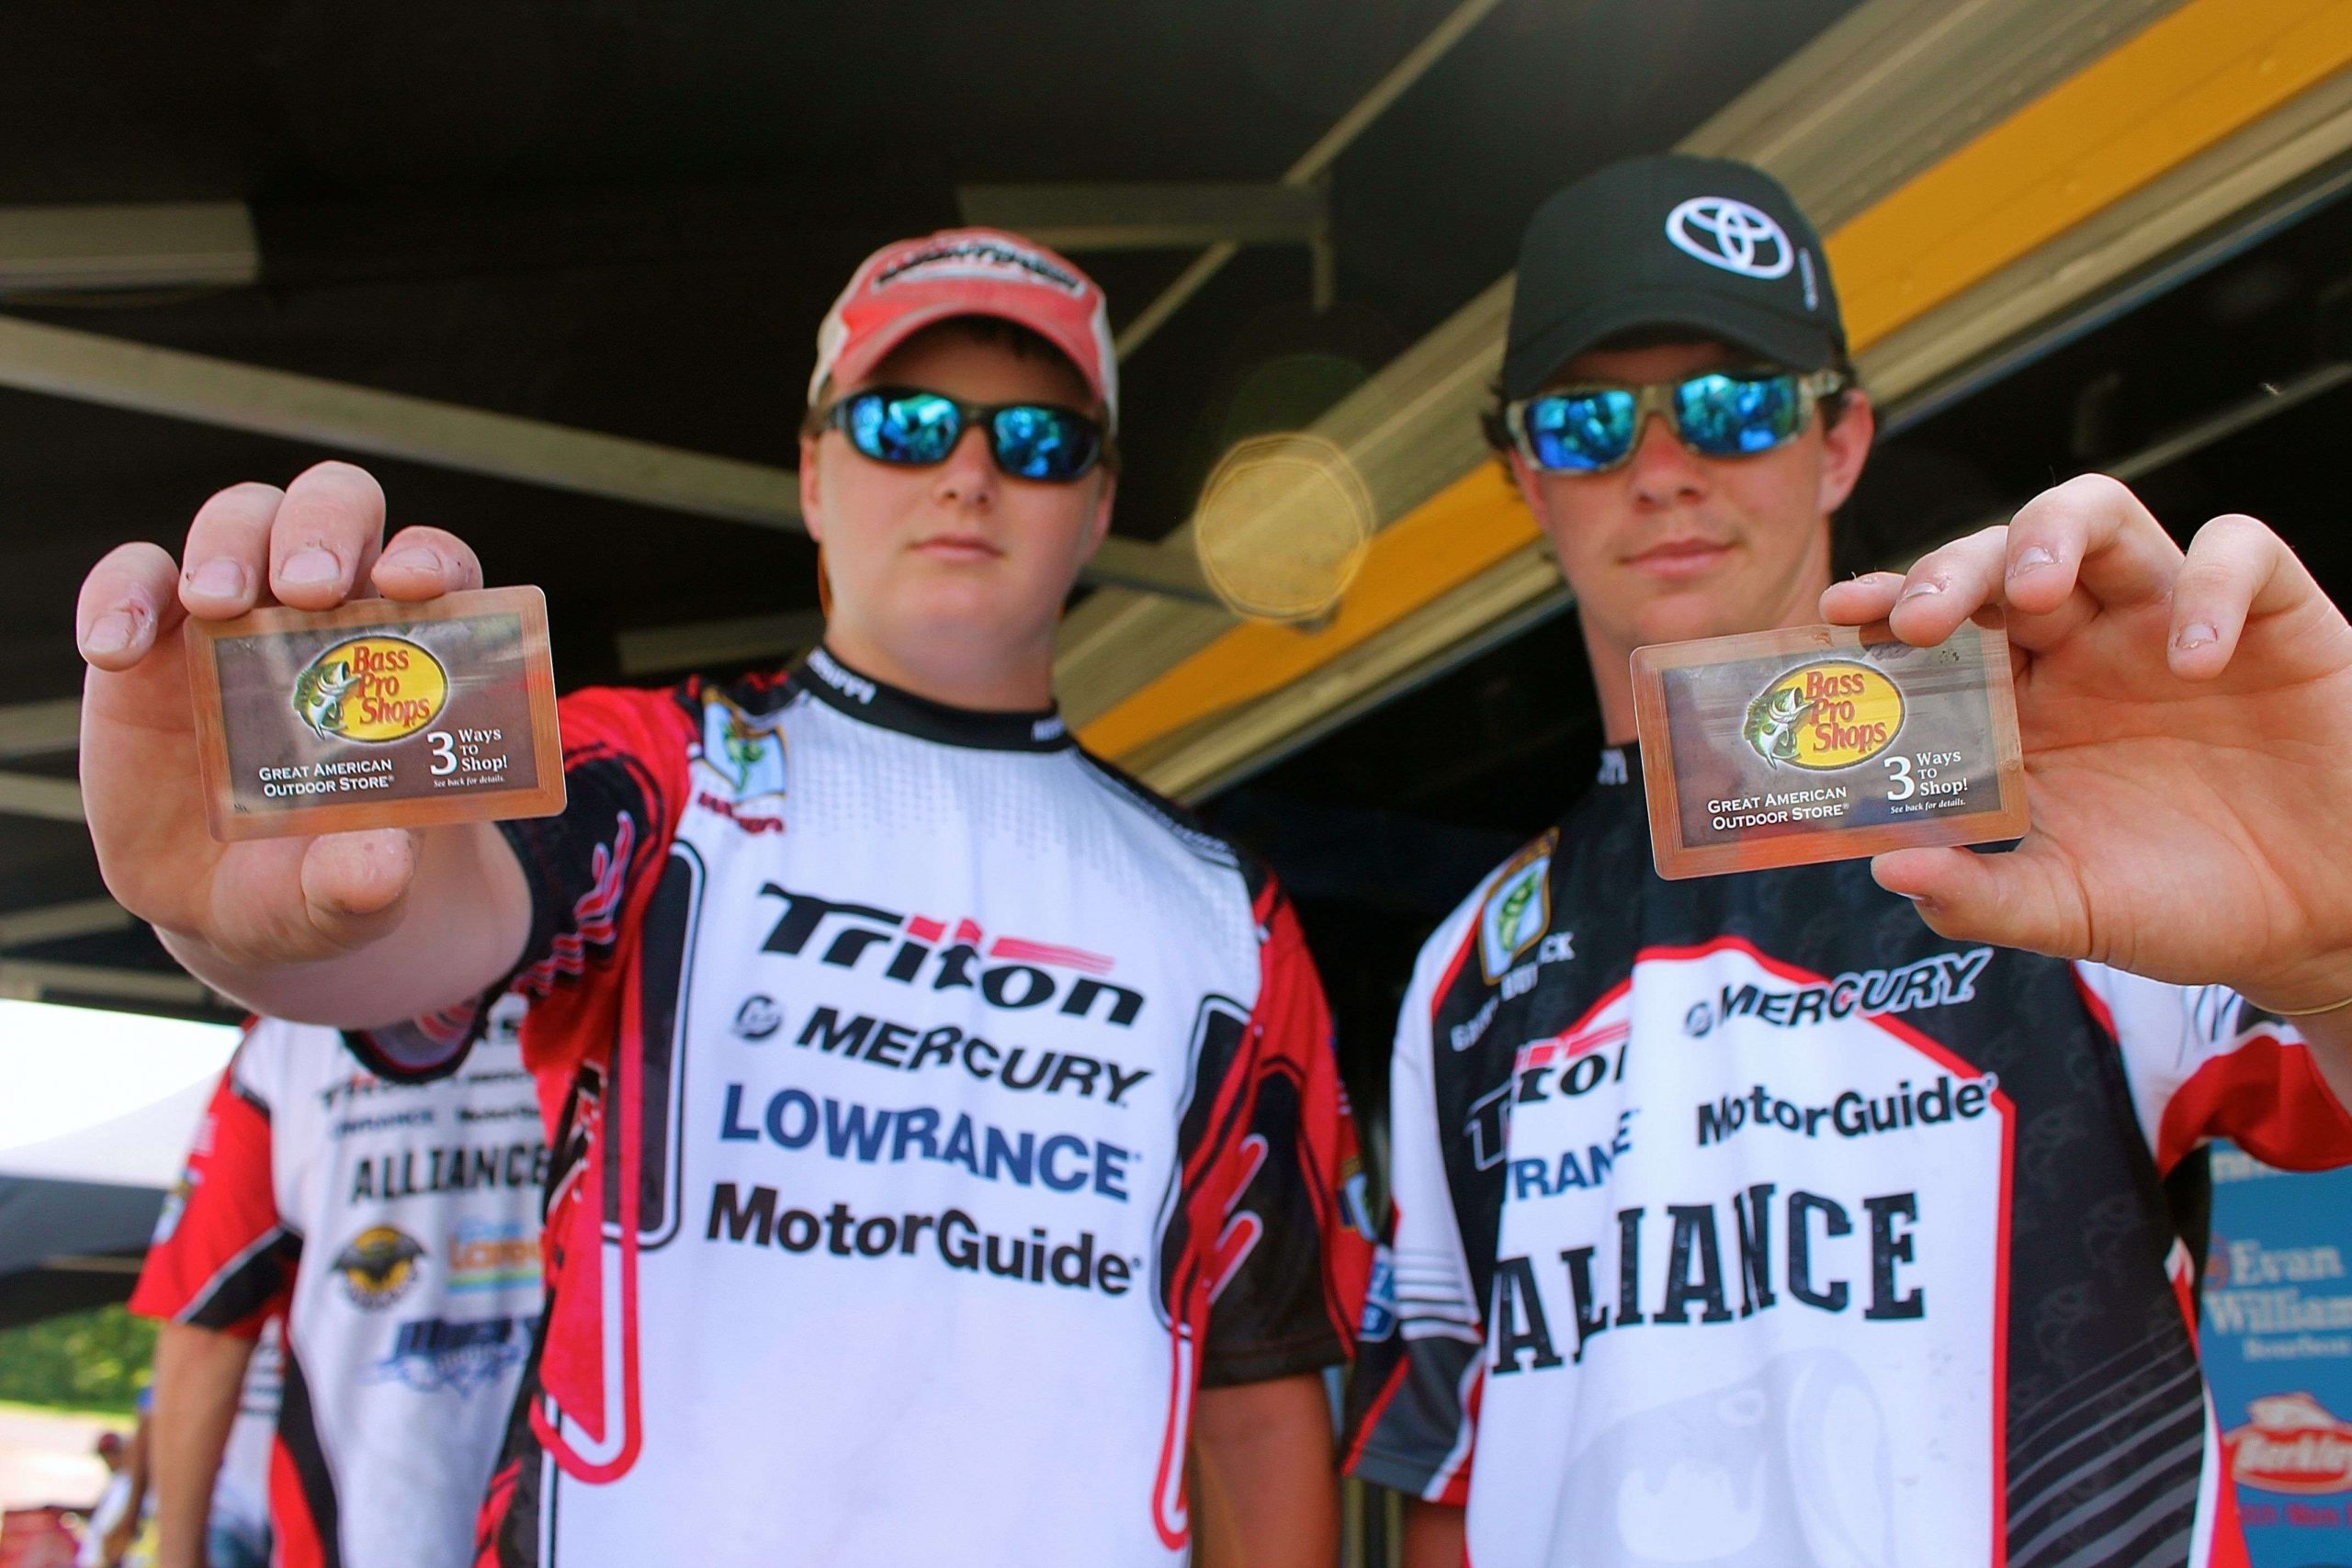 Each high school angler in the tournament received a $100 Bass Pro Shops gift card.